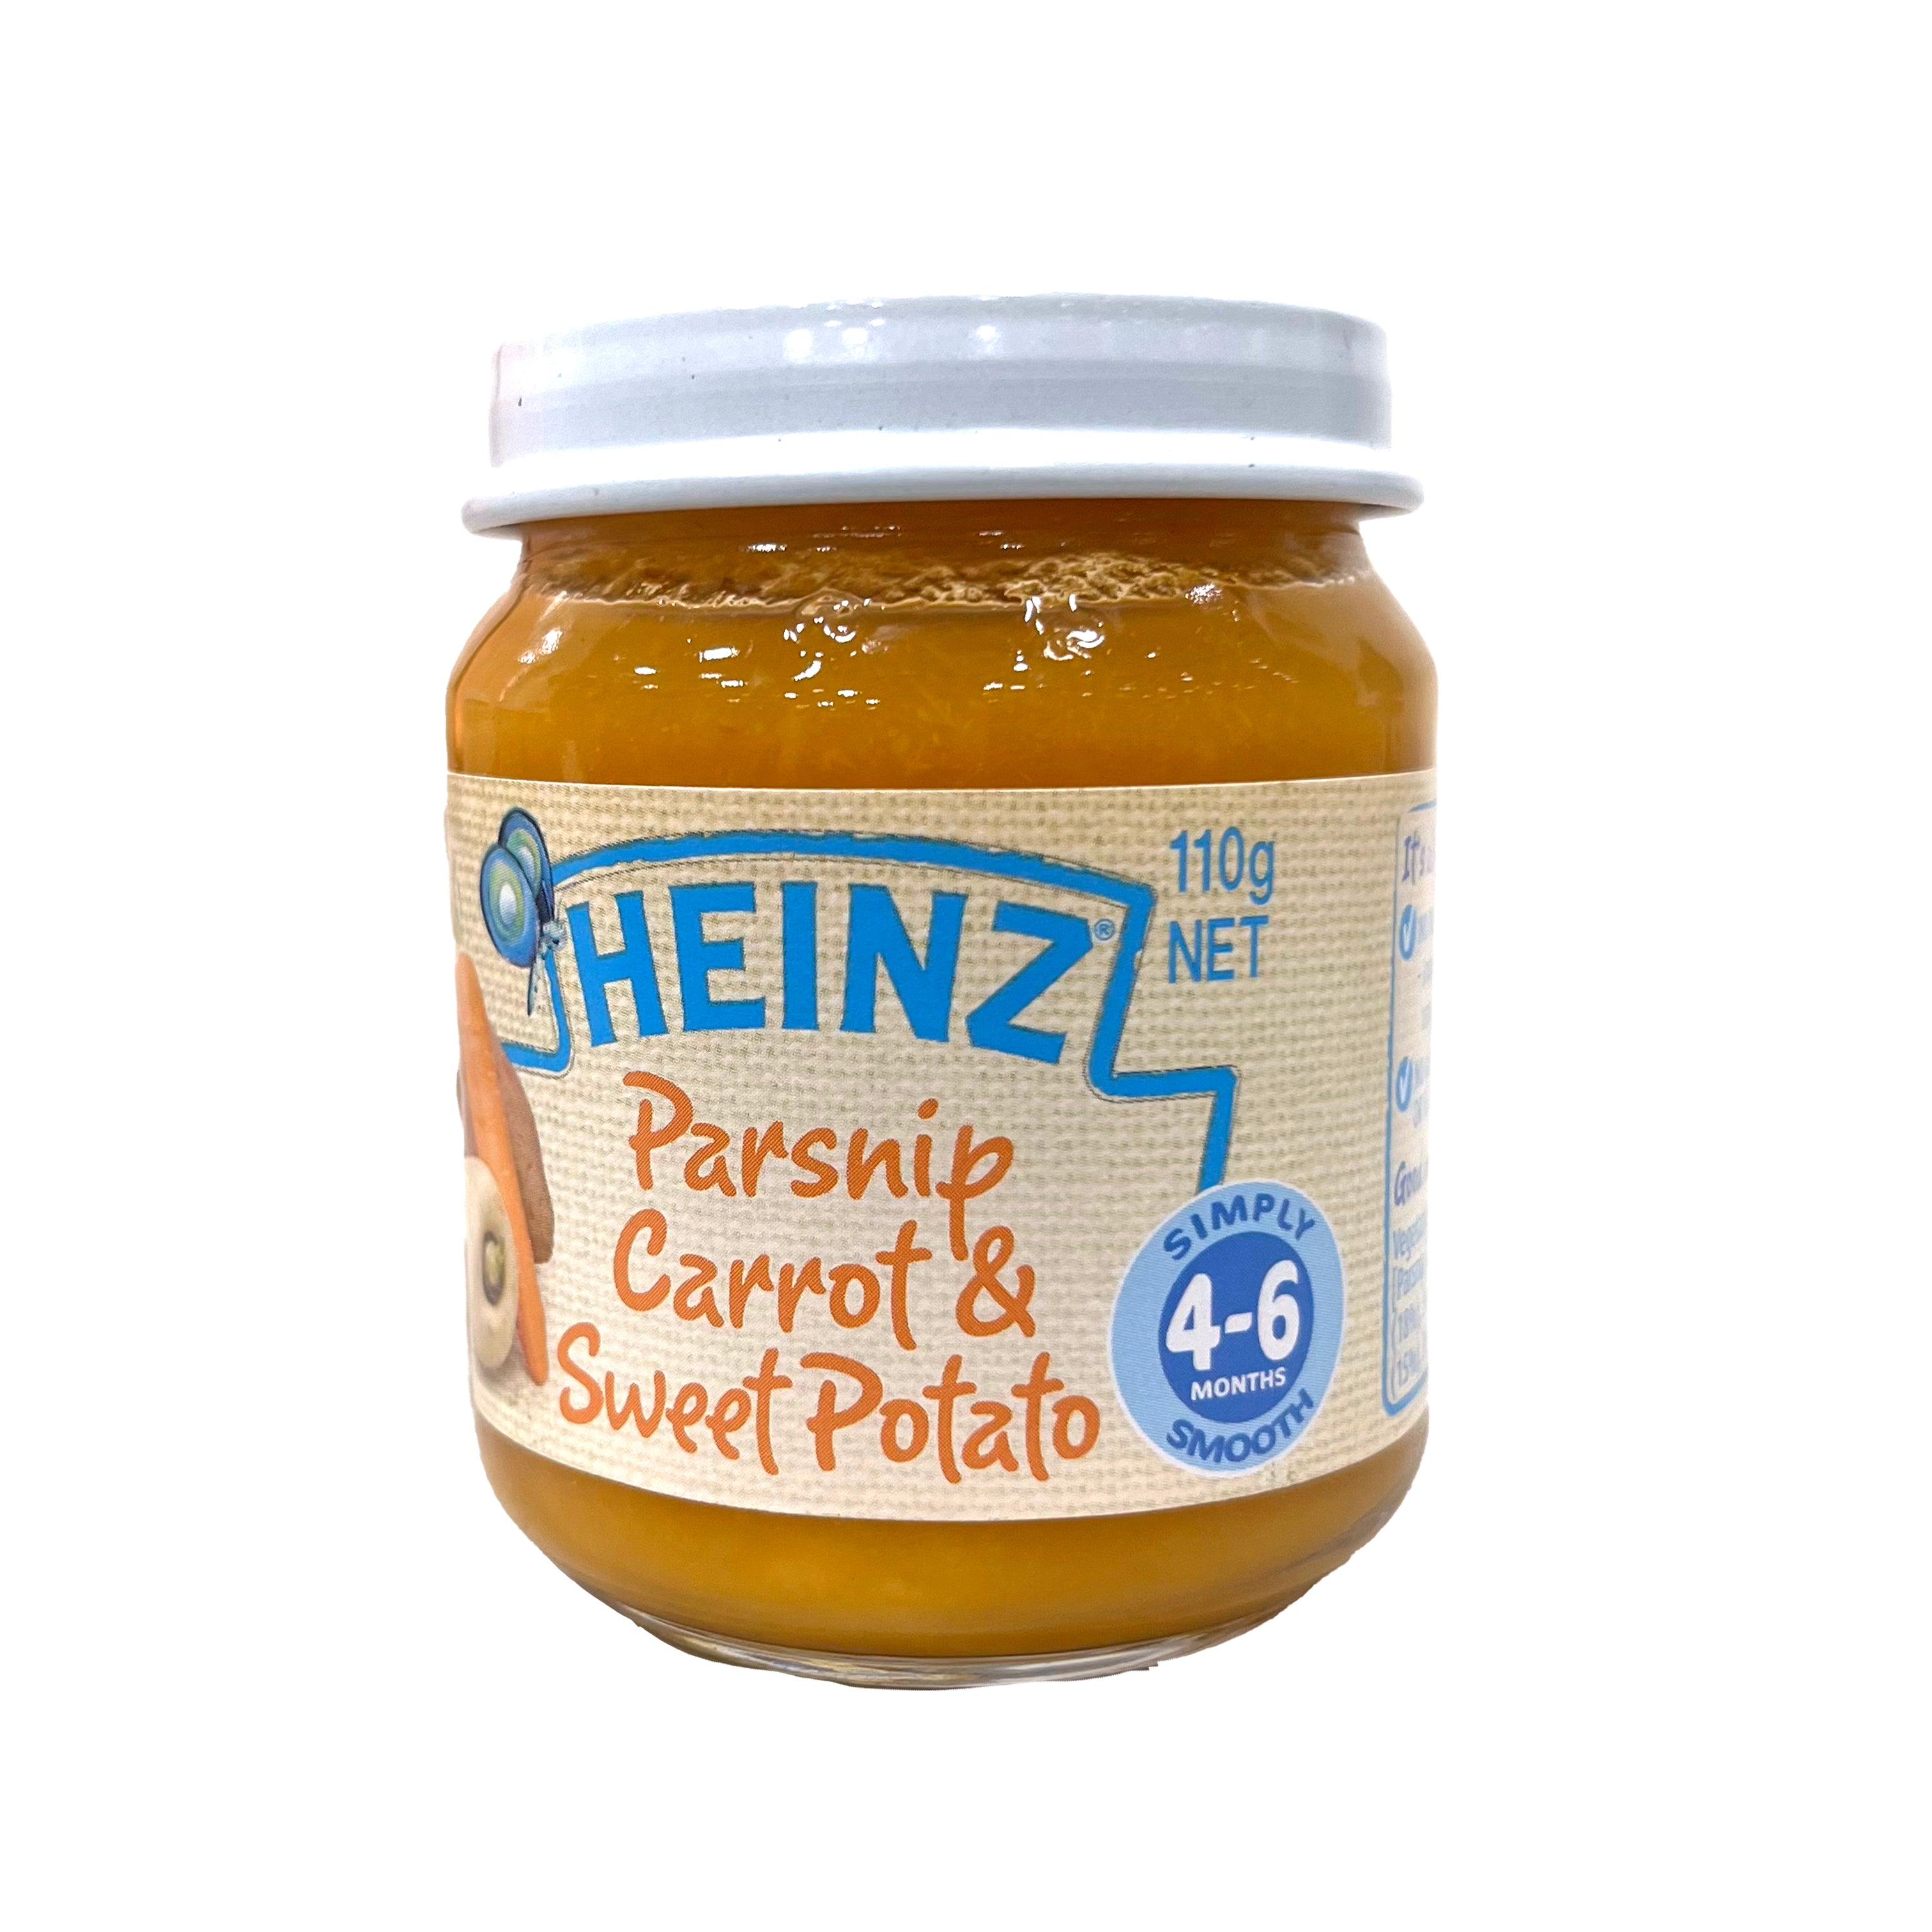 Buy Heinz Puree with Parsnip, Carrot & Sweet Potato for your Baby, 110gms Online in India at uyyaala.com